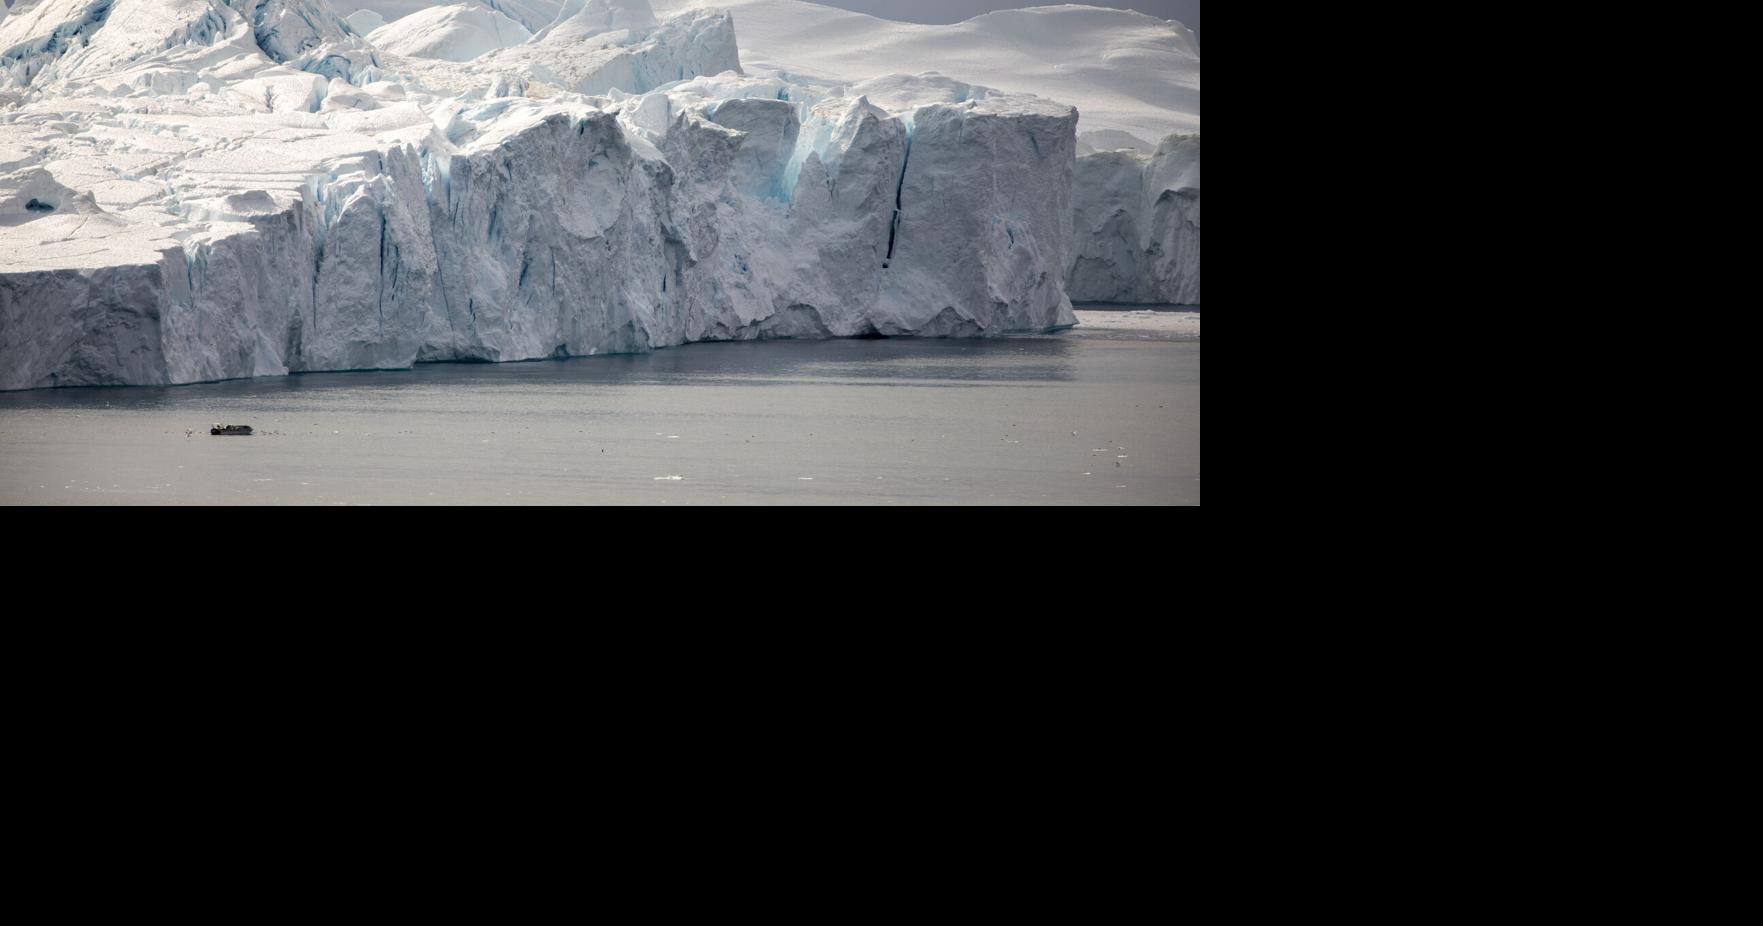 Greenland is a wonderland of ice. Its melting glaciers could seal the Lowcountry's fate.